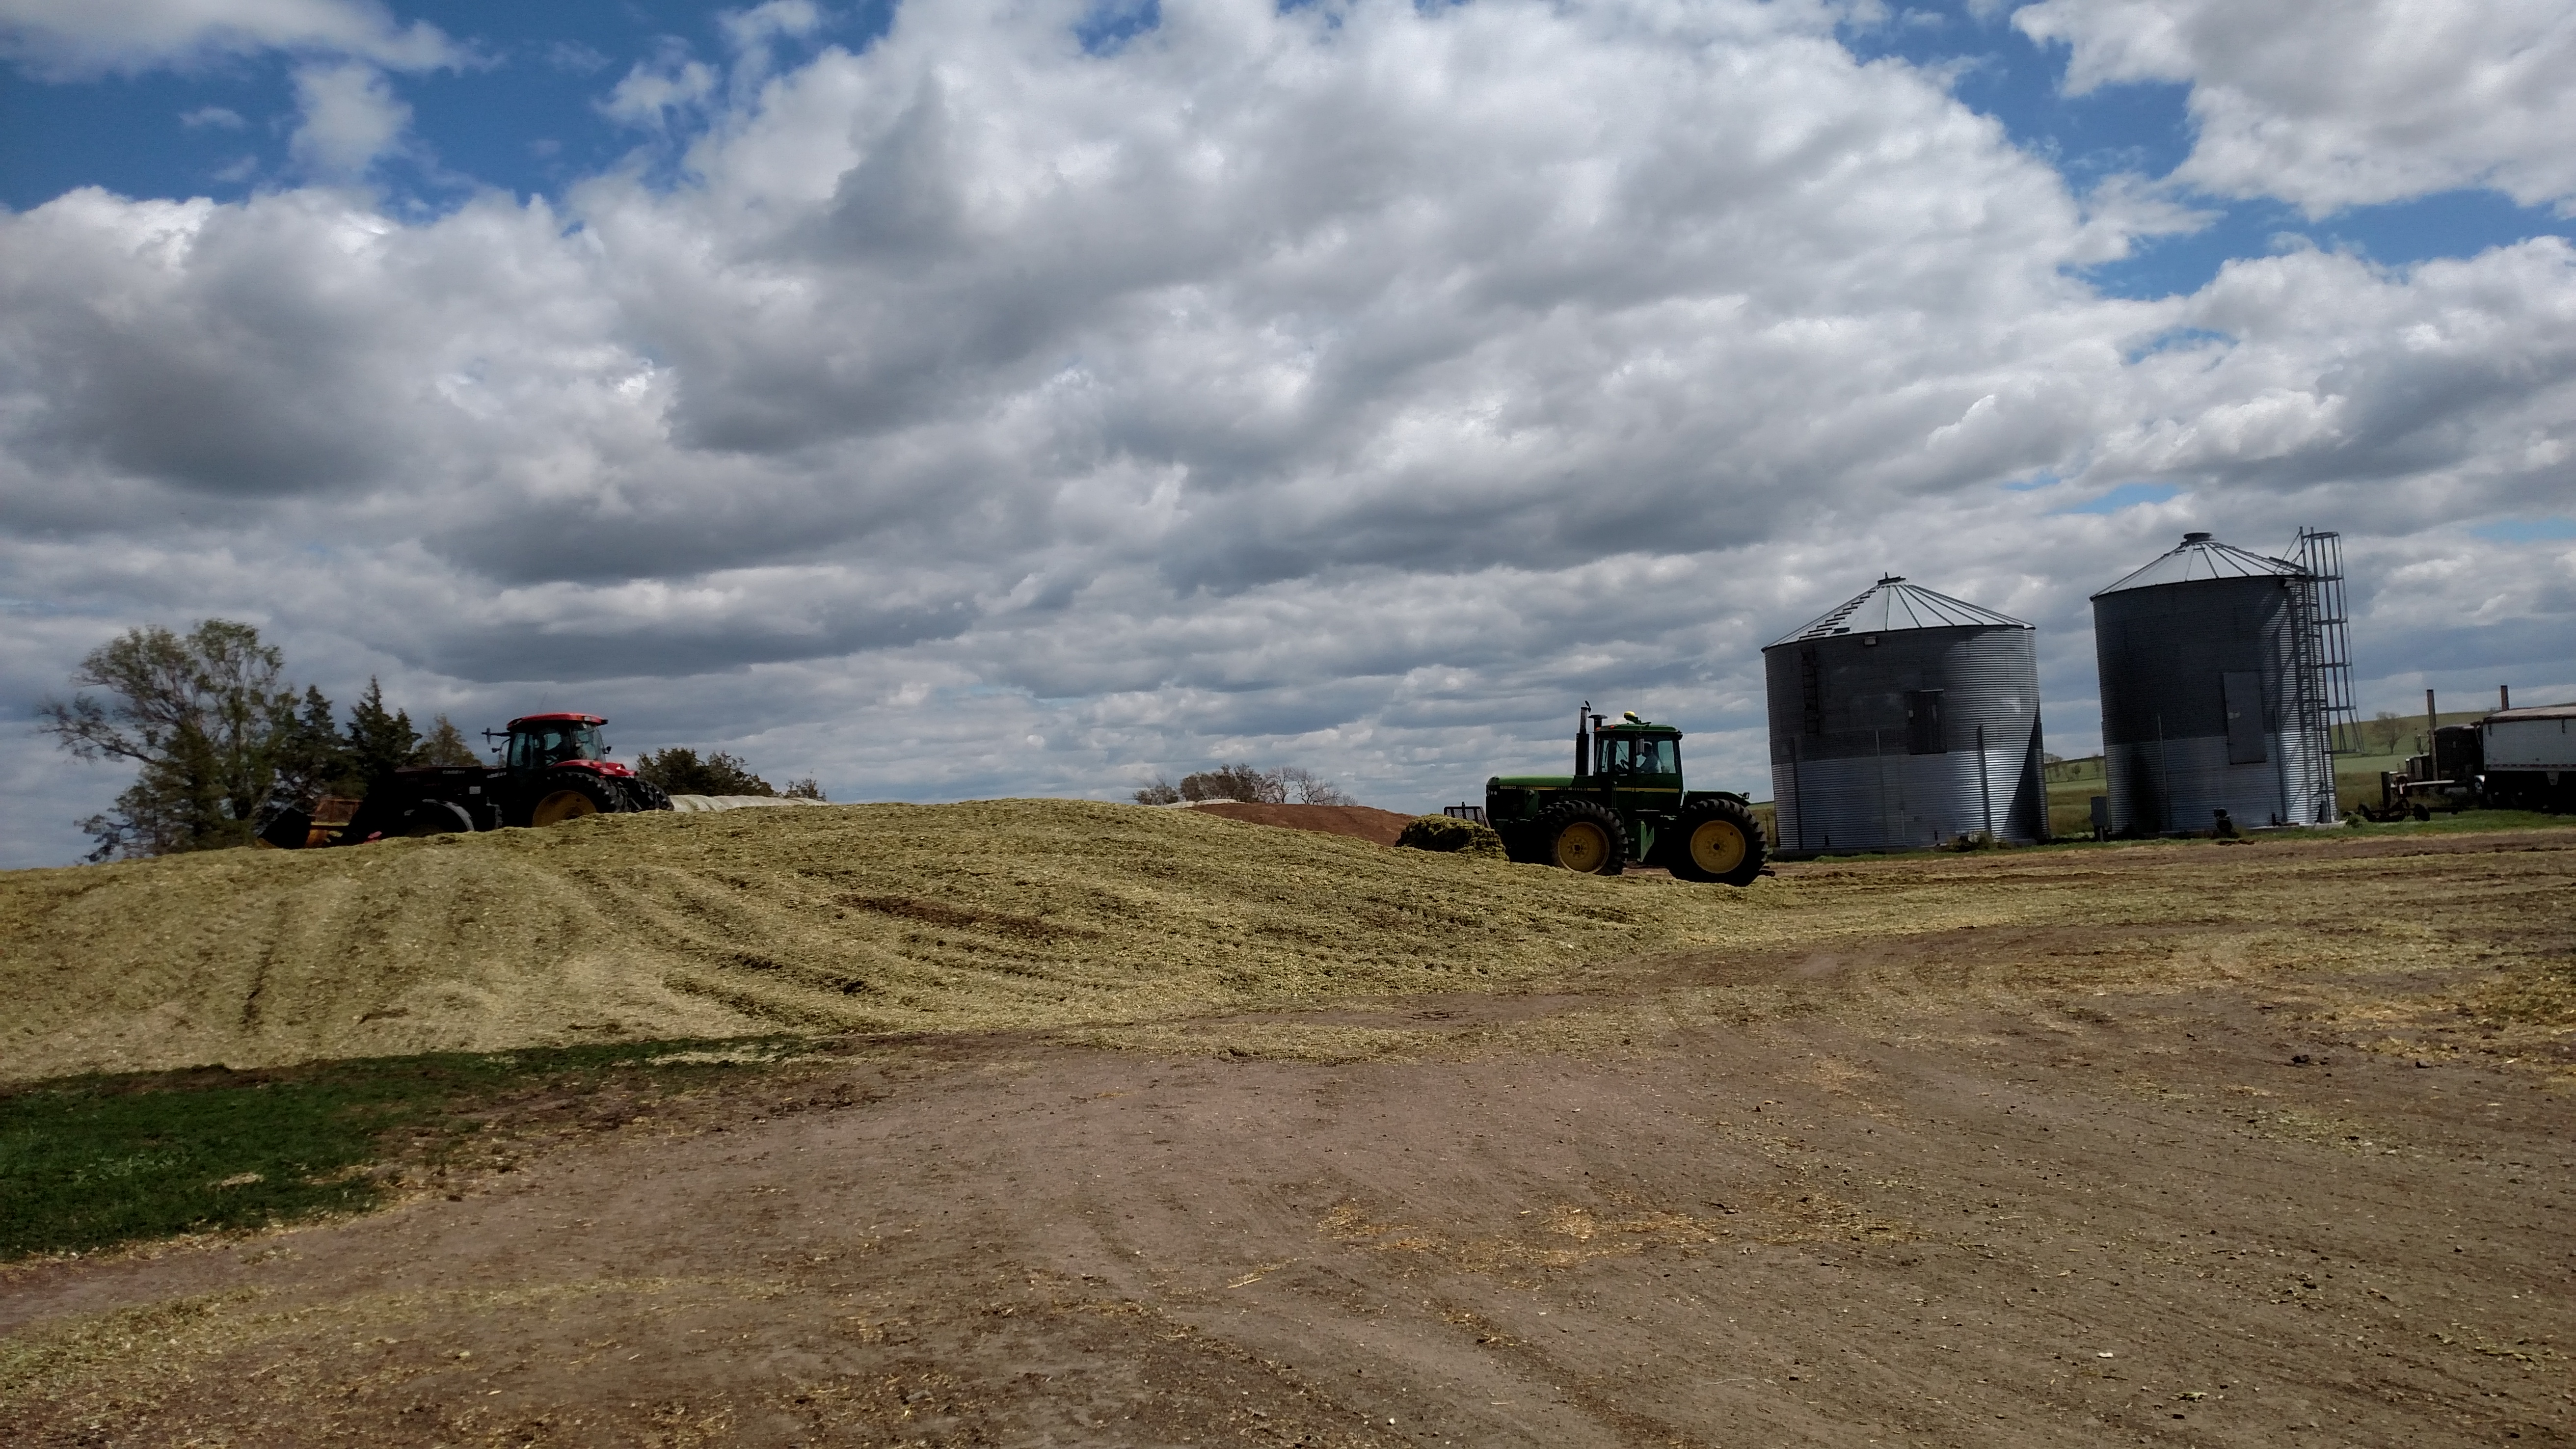 tractor near pile of harvested silage